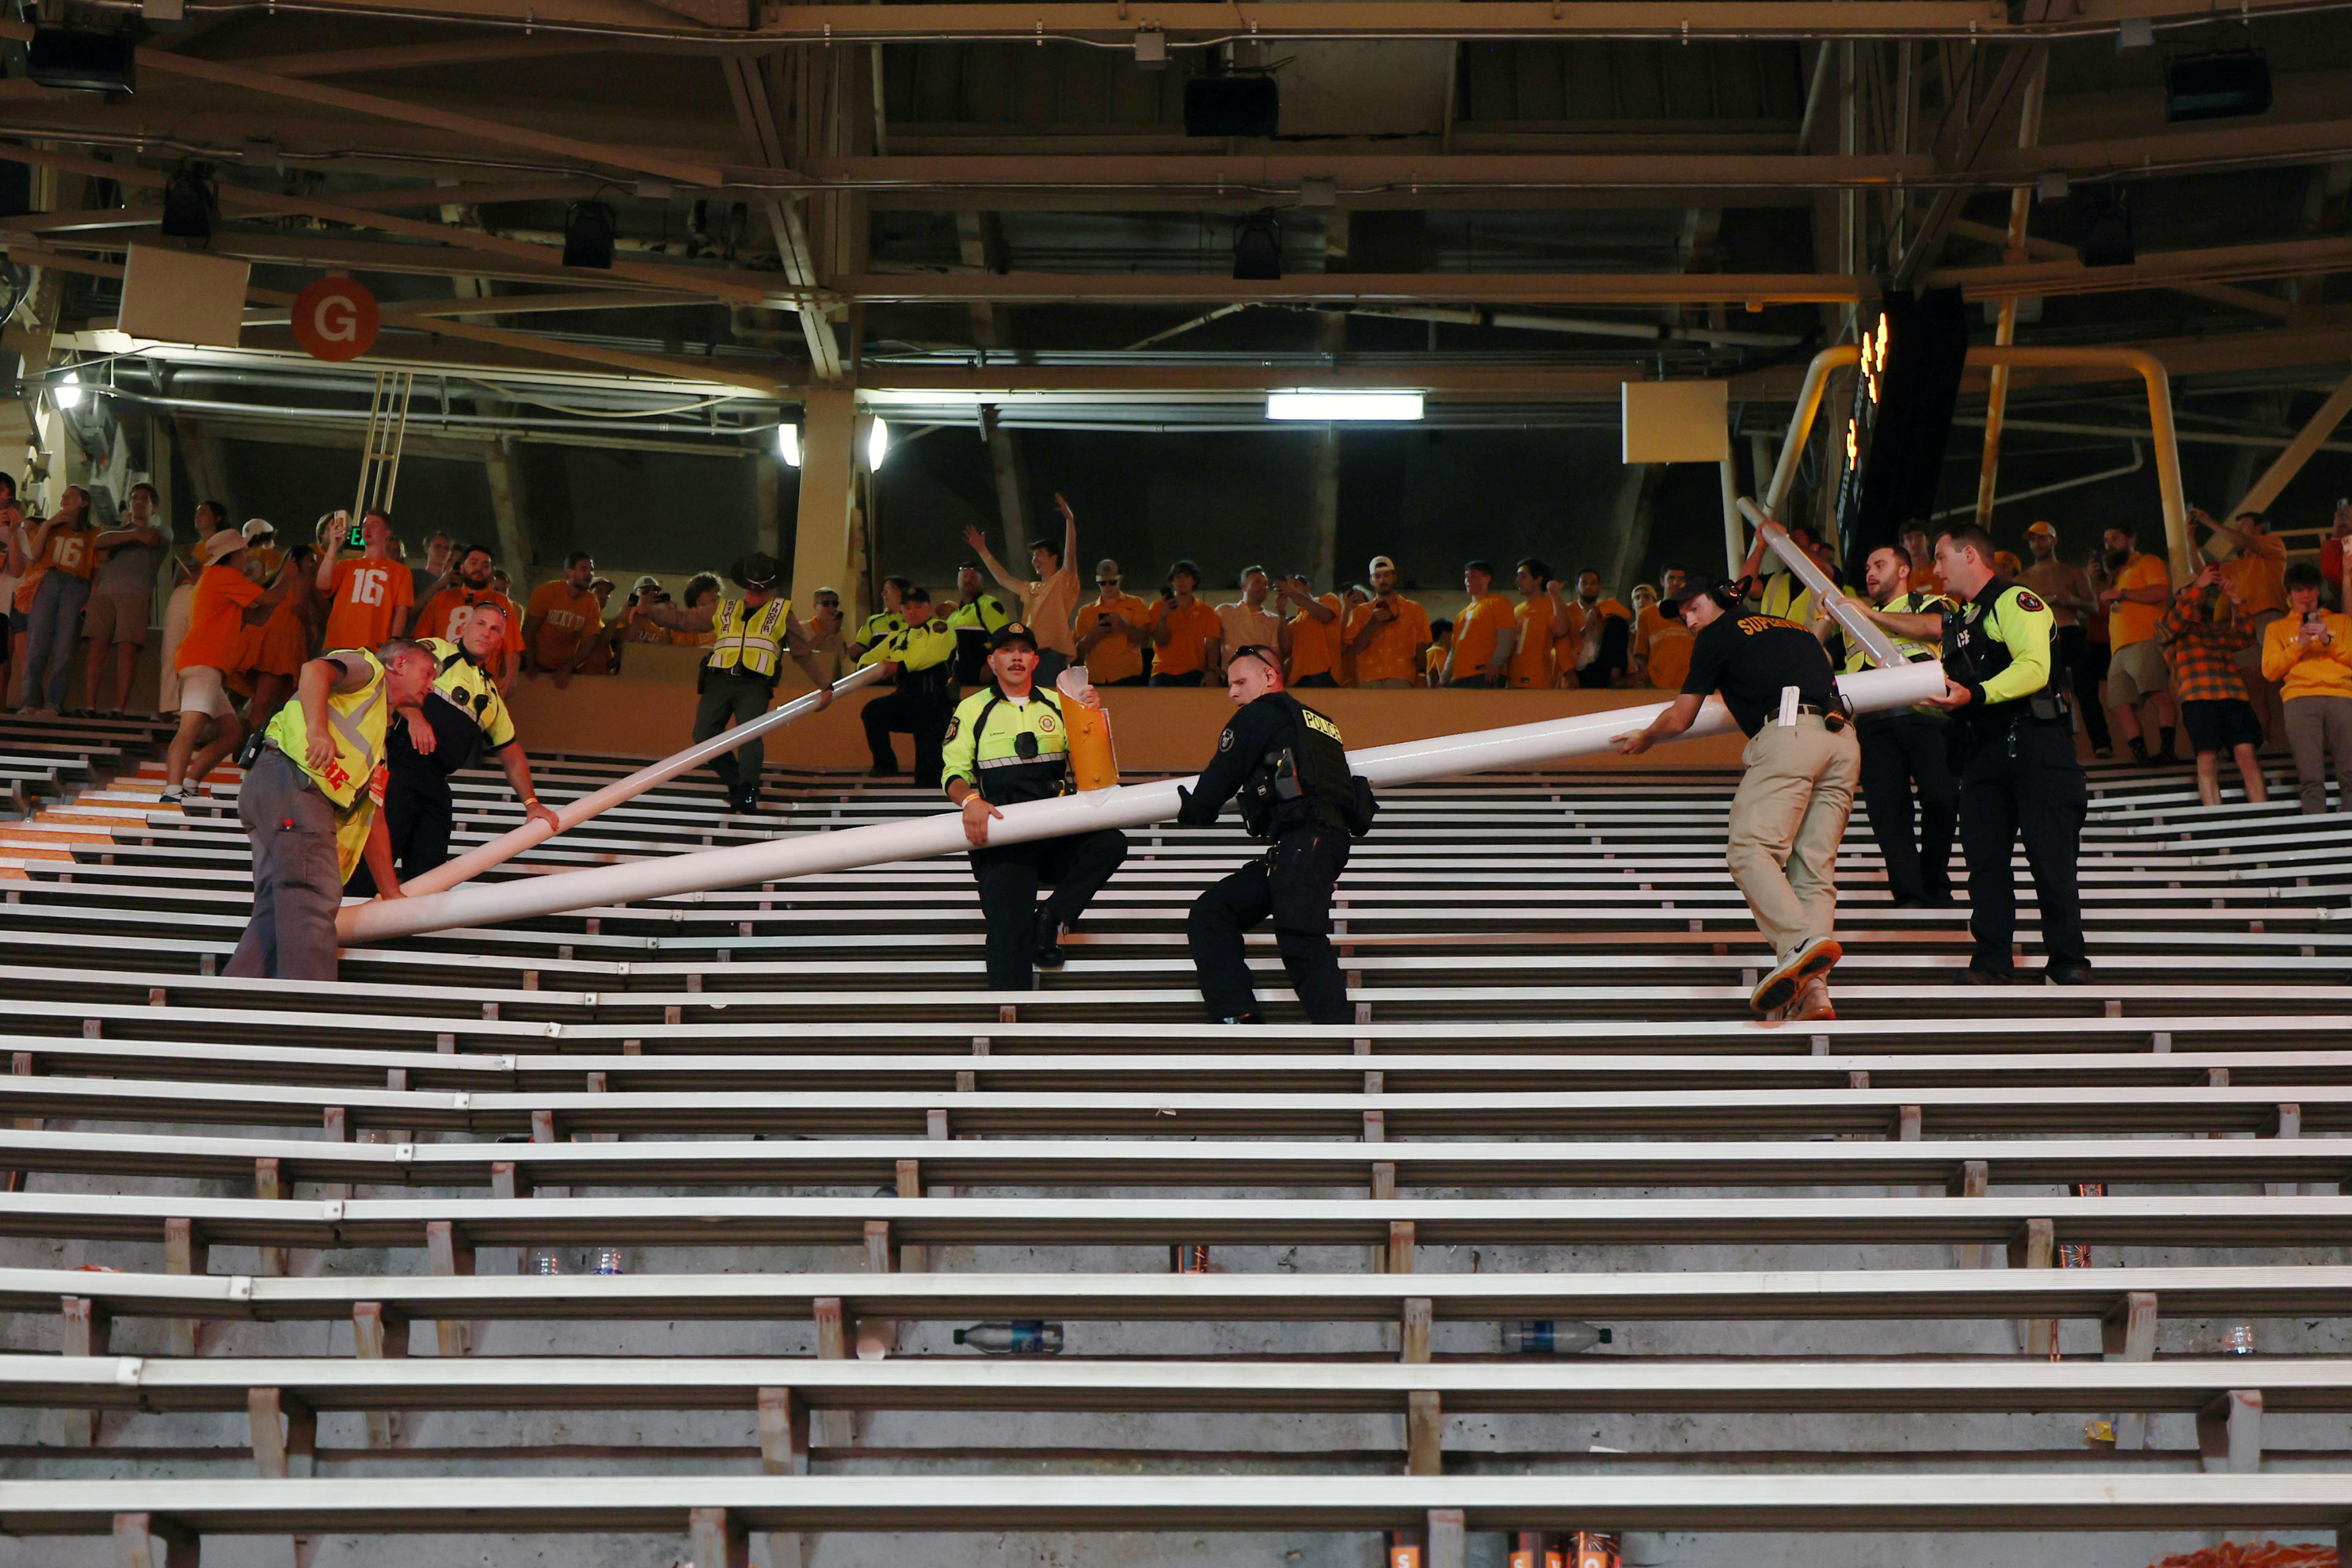 KNOXVILLE, TENNESSEE - OCTOBER 15: Police take control of a field goal post carried into the stands by fans after the Tennessee Volunteers defeat the Alabama Crimson Tide at Neyland Stadium on October 15, 2022 in Knoxville, Tennessee. Tennessee won the game 52-49. (Photo by Donald Page/Getty Images)